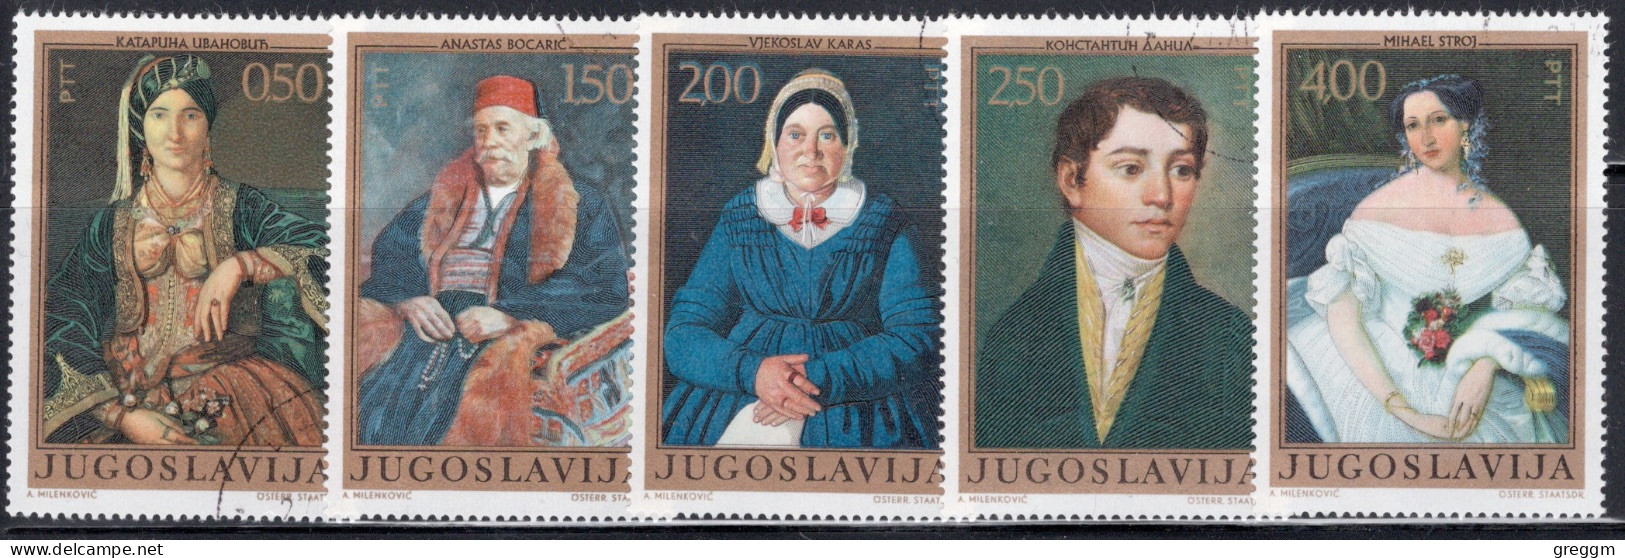 Yugoslavia 1971 Short Set Of Stamps For Portraits From The 19th Century  In Fine Used - Gebruikt